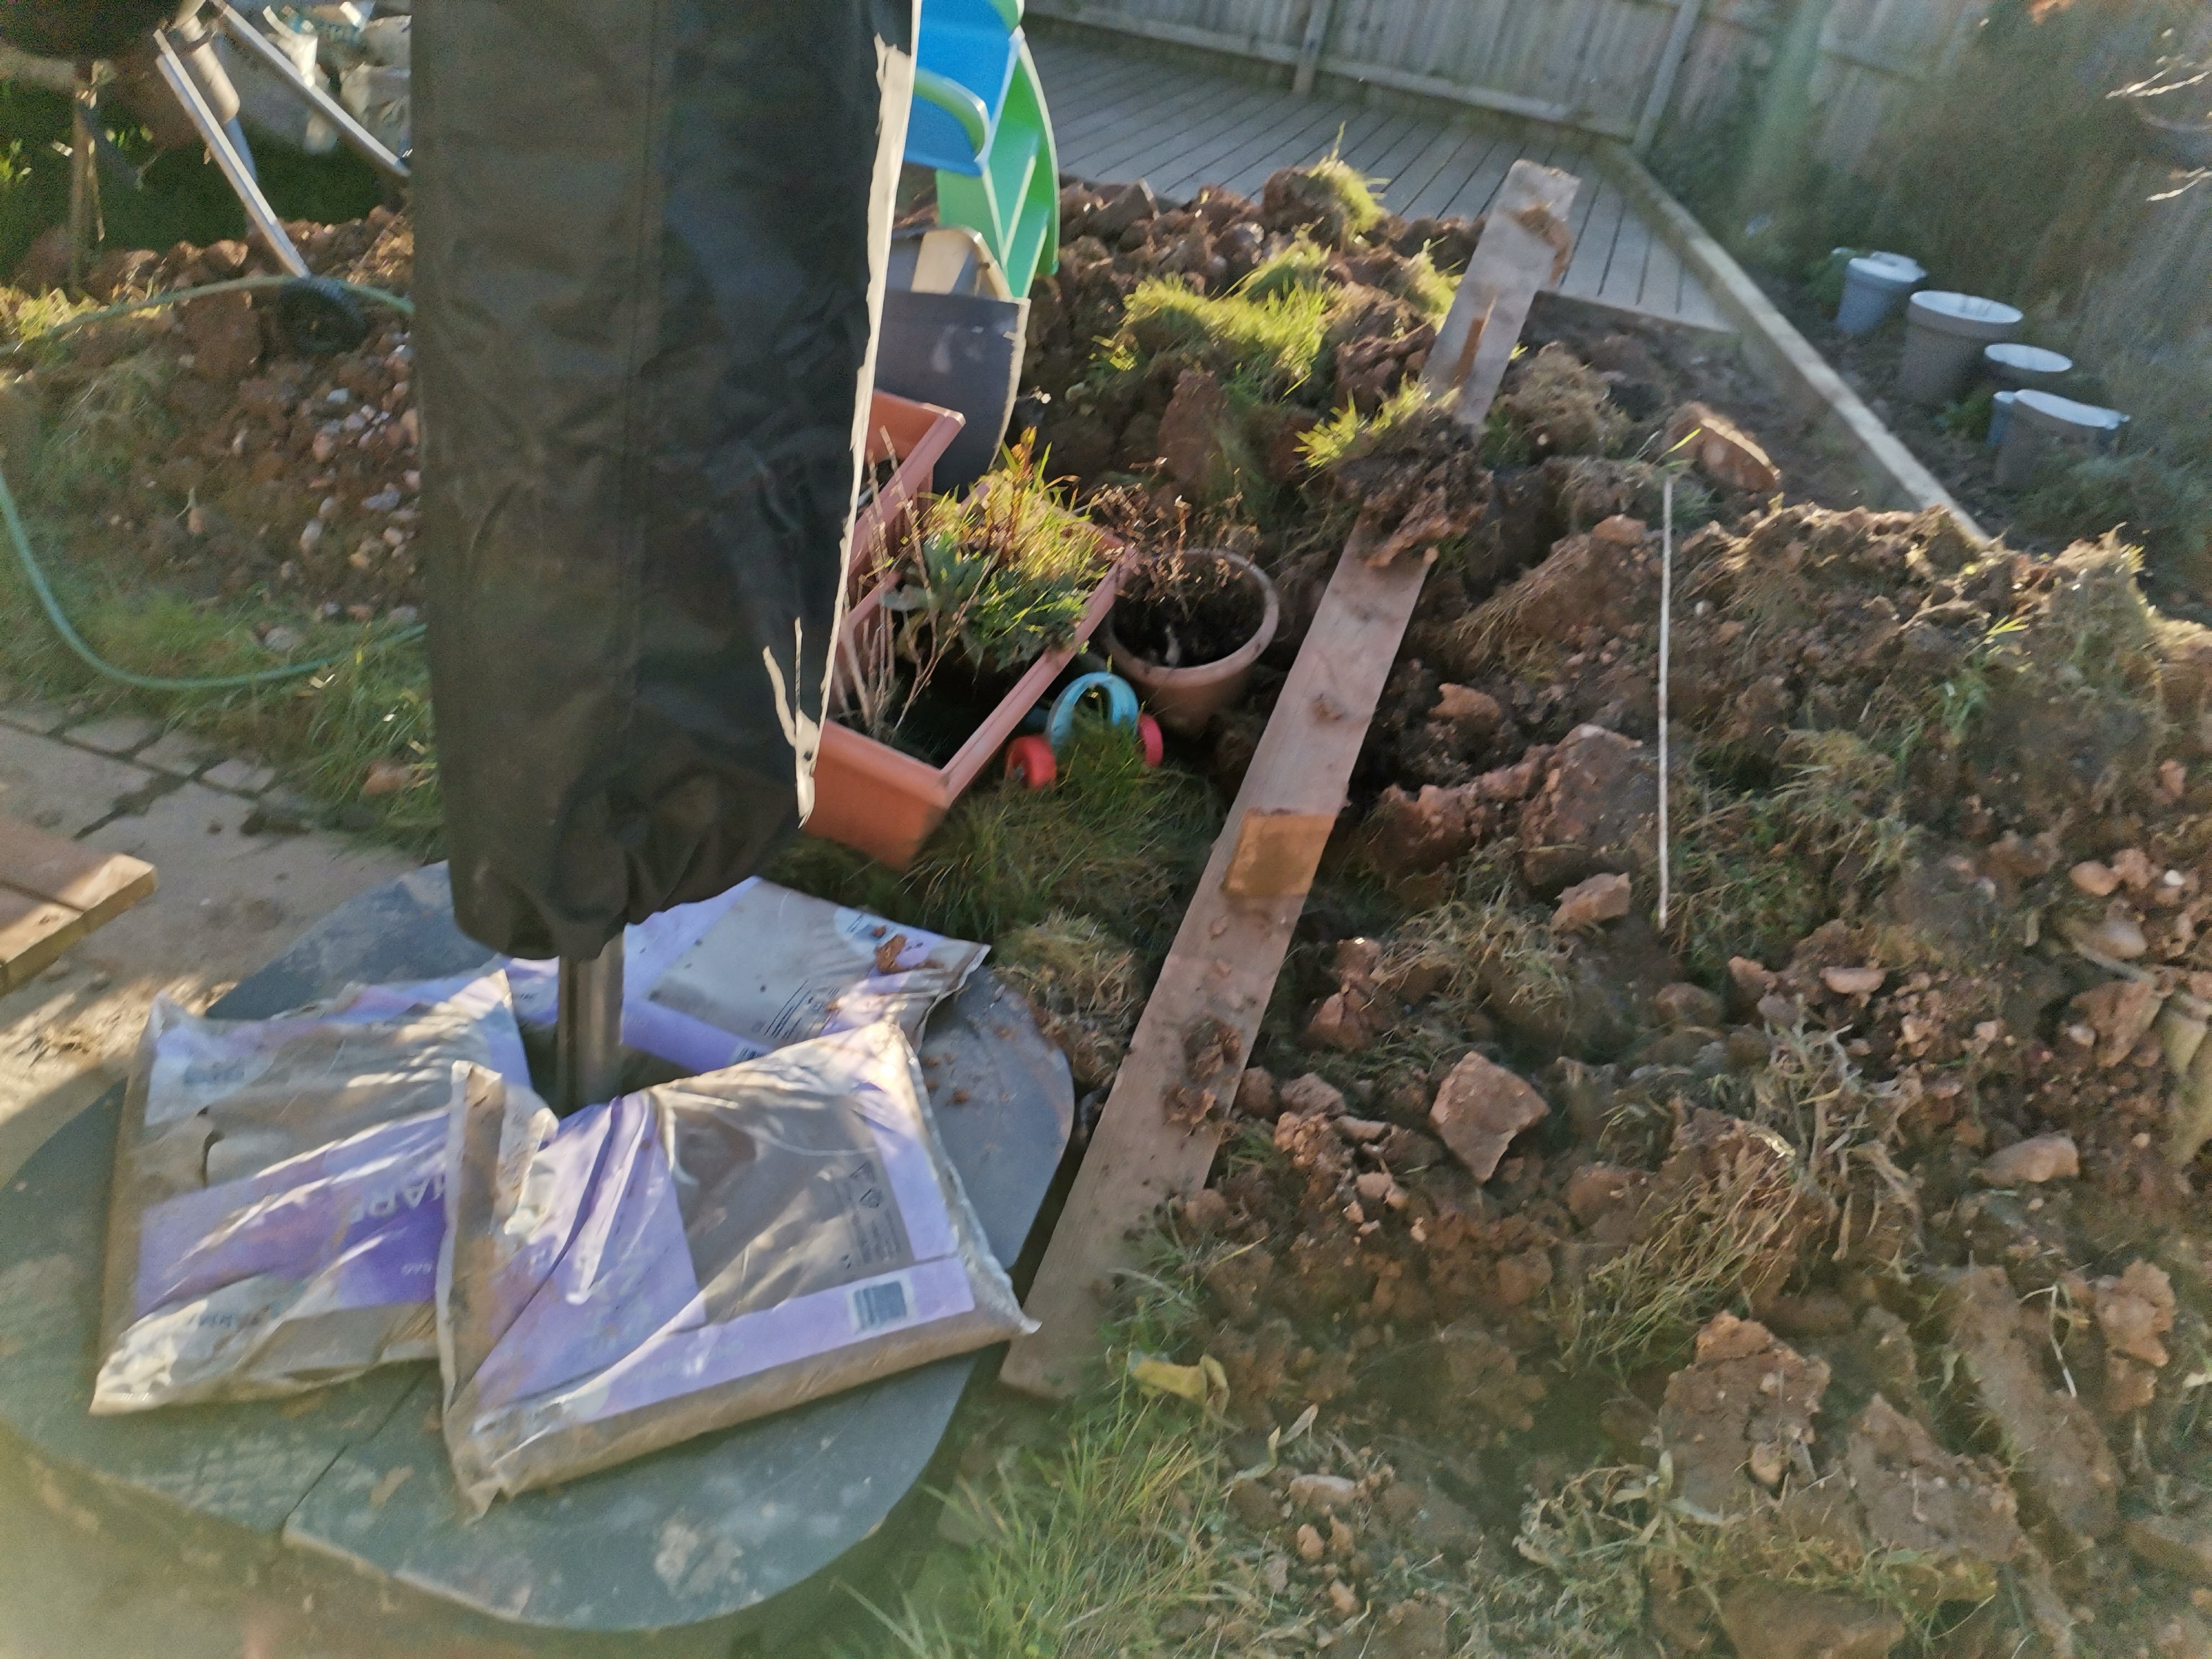 Garden area under renovation with exposed soil, garden tools, a wheelbarrow, plant pots, and bags of garden products, indicating ongoing landscaping work in a backyard during sunset.